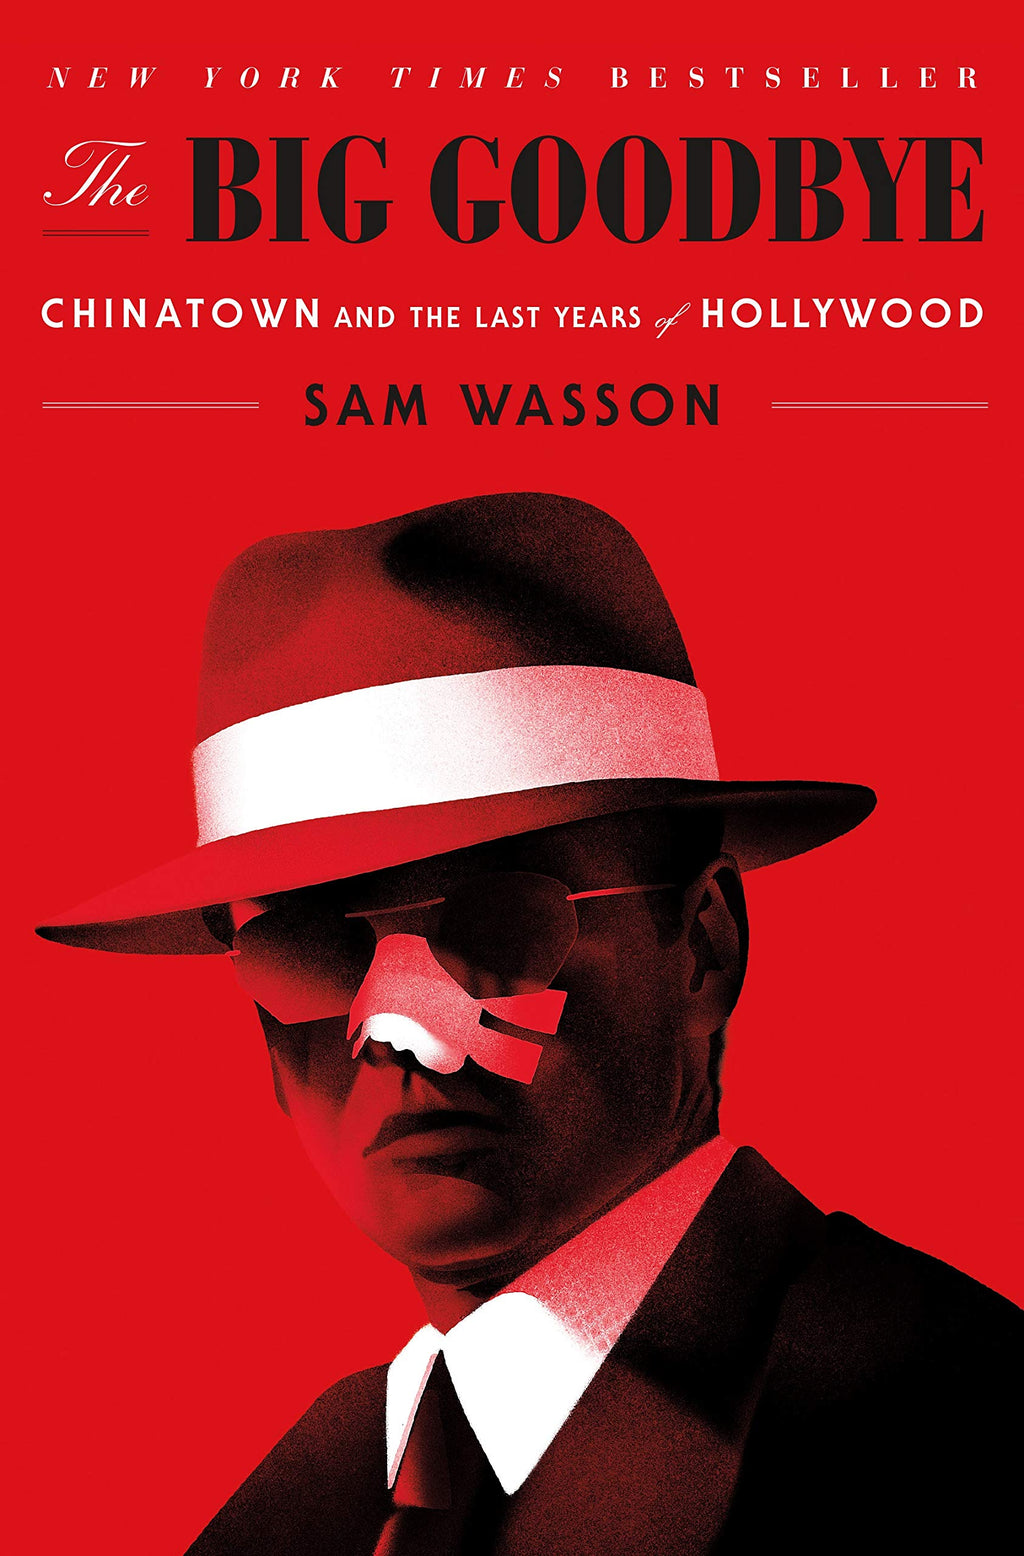 The Big Goodbye: Chinatown and the Last Years of Hollywood by Sam Wasson